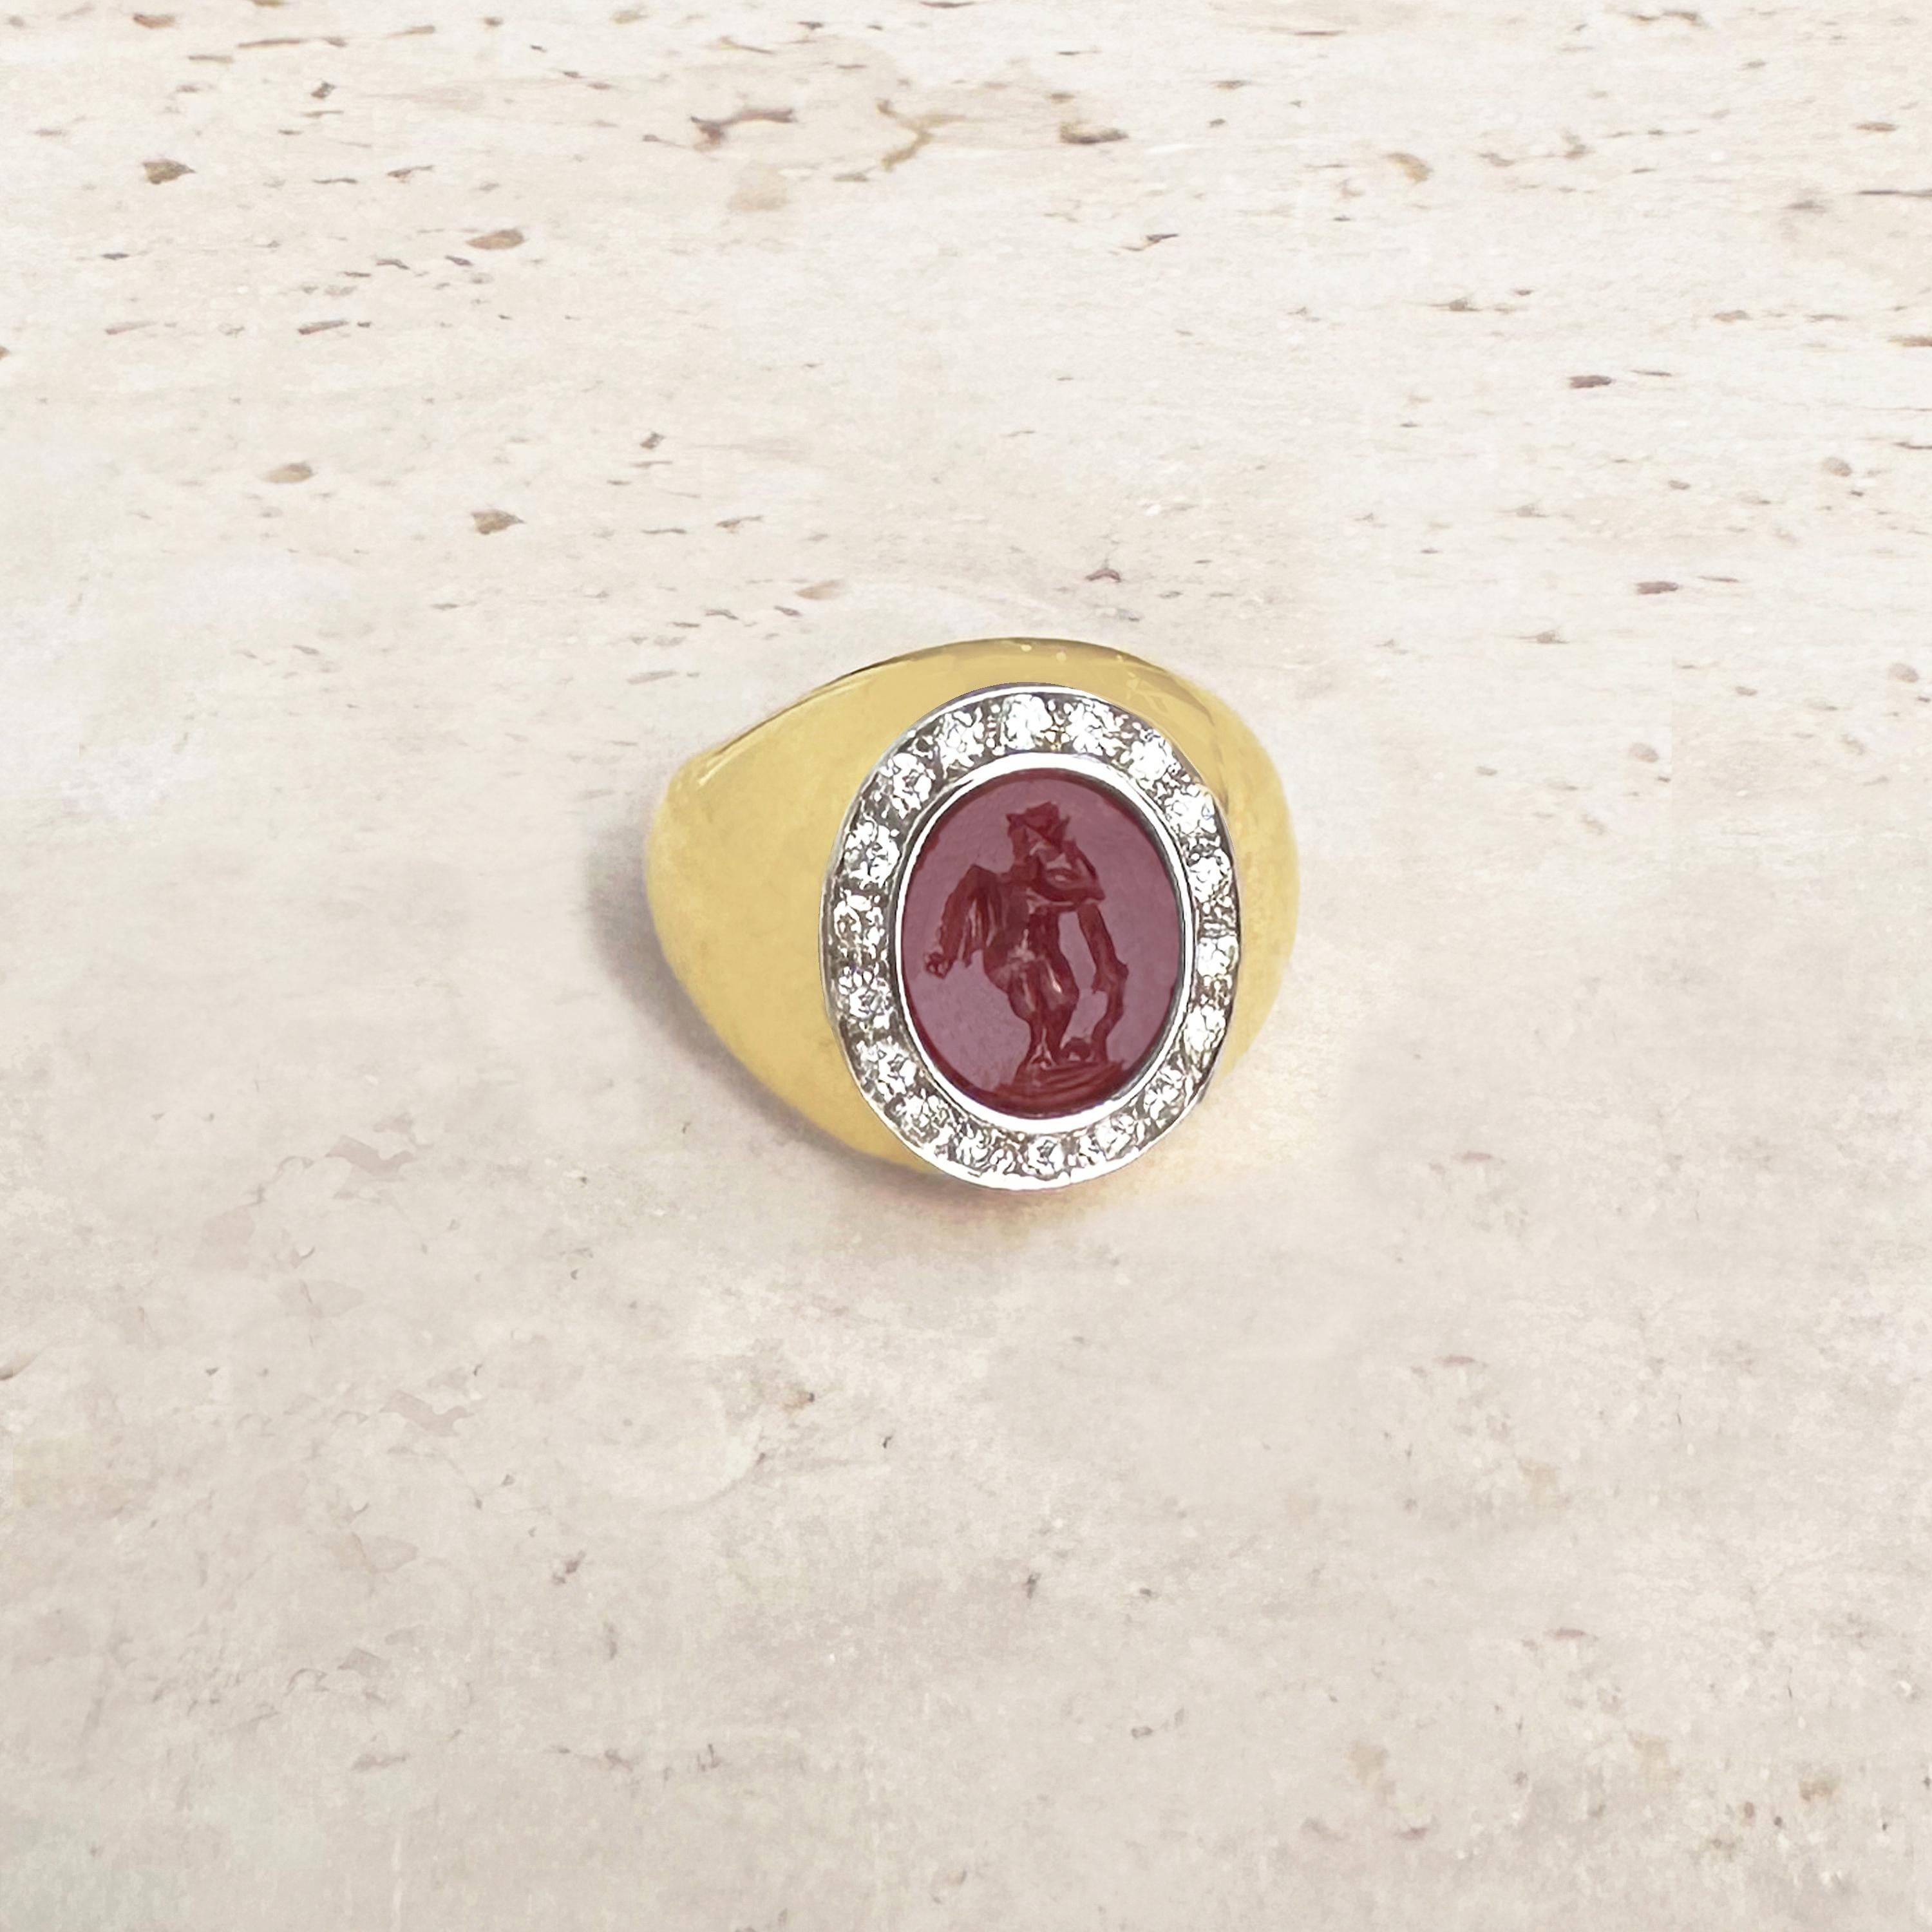 Contemporary Roman Garnet Intaglio (1st cent. AD) depicting a Cupid /Eros 18 kt Gold Ring  For Sale